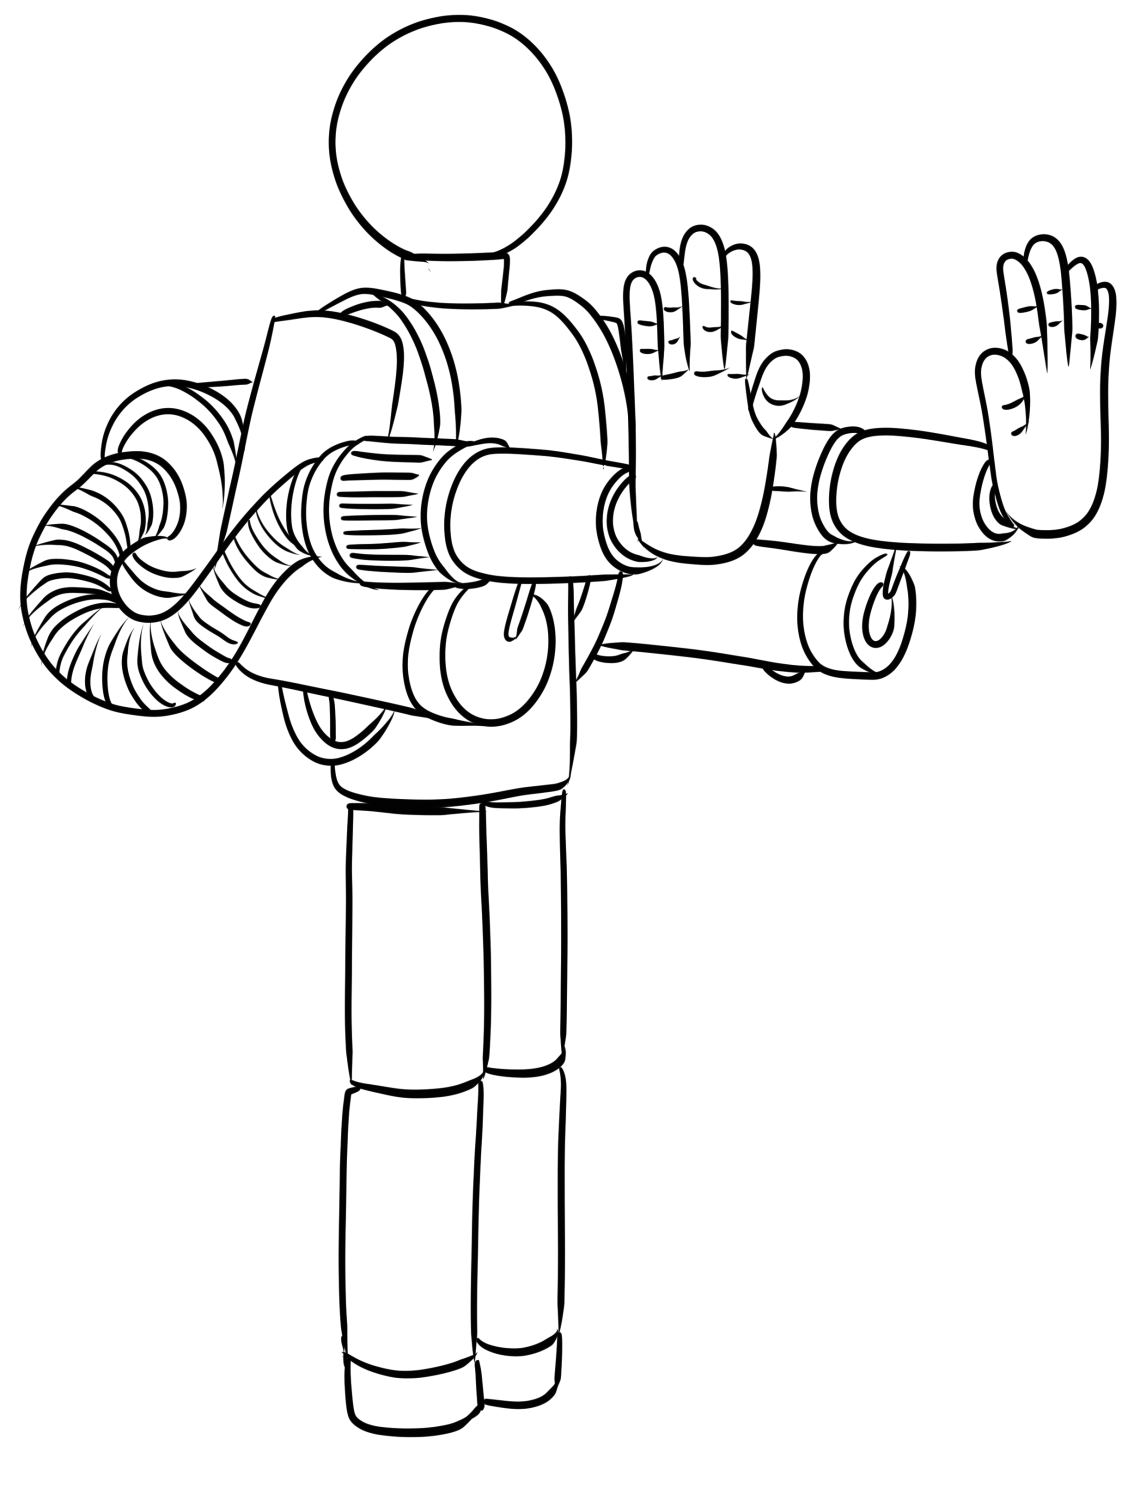 The Player from Poppy Playtime coloring pages to print and coloring